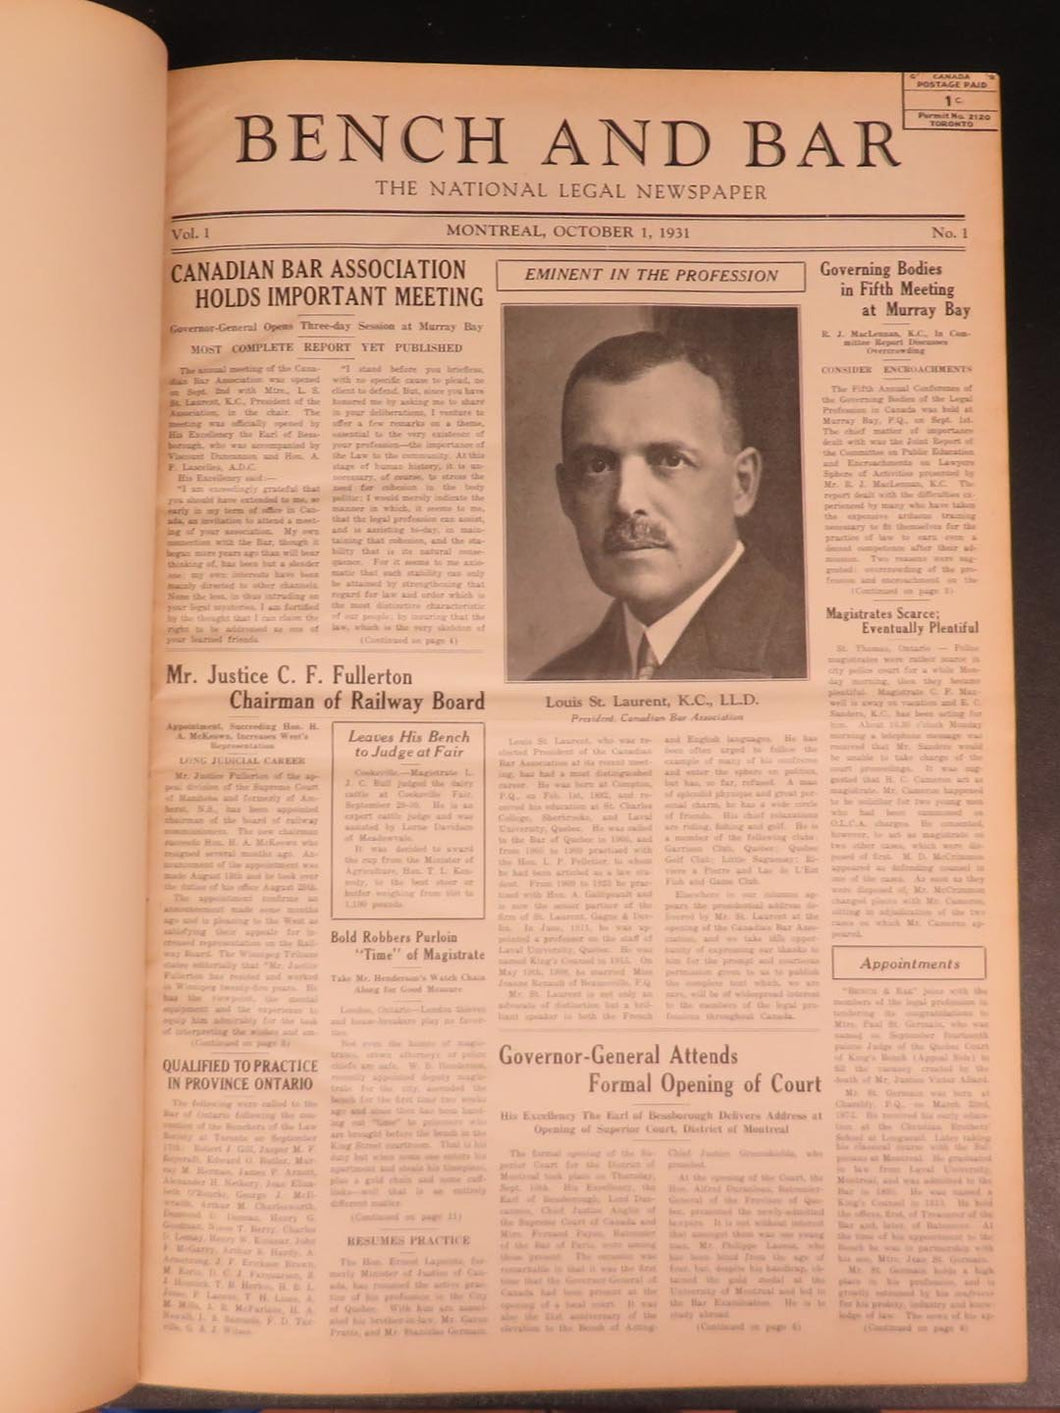 Bench and Bar: The National Legal Newspaper October 1931 - December 1932